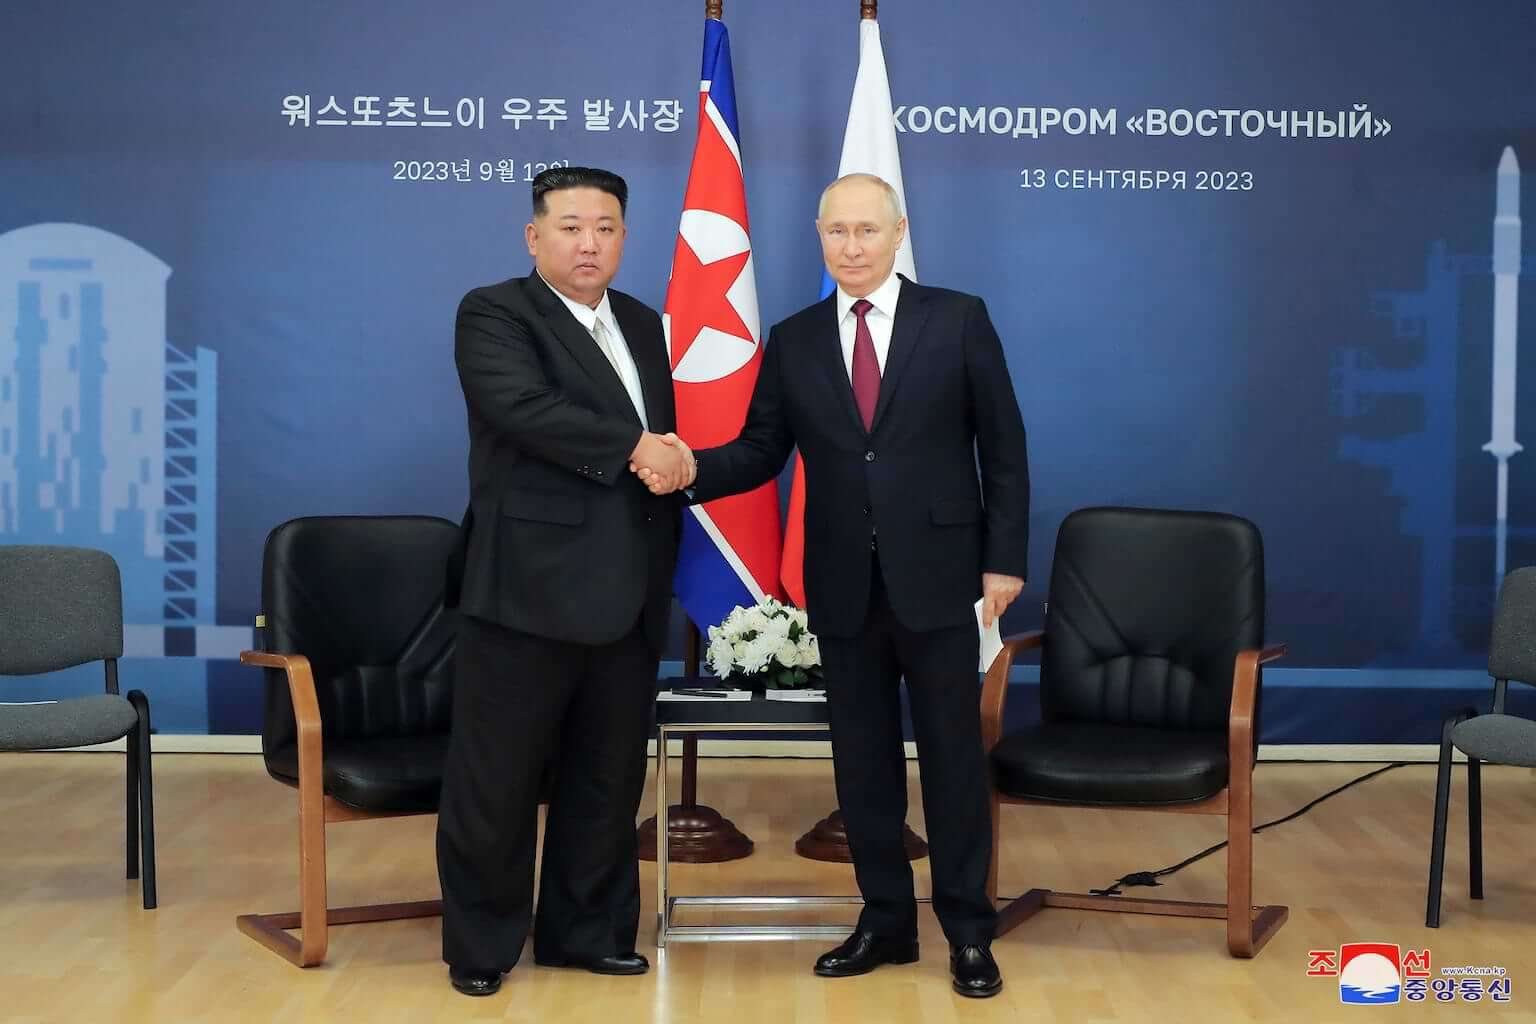 In this photo provided by the North Korean government, North Korean leader Kim Jong Un, left, and Russian President Vladimir Putin shake hands before their talk at the Vostochny cosmodrome outside the city of Tsiolkovsky, about 200 kilometers (125 miles) from the city of Blagoveshchensk in the far eastern Amur region, Russia, Wednesday, Sept. 13, 2023. (Korean Central News Agency/Korea News Service via AP)